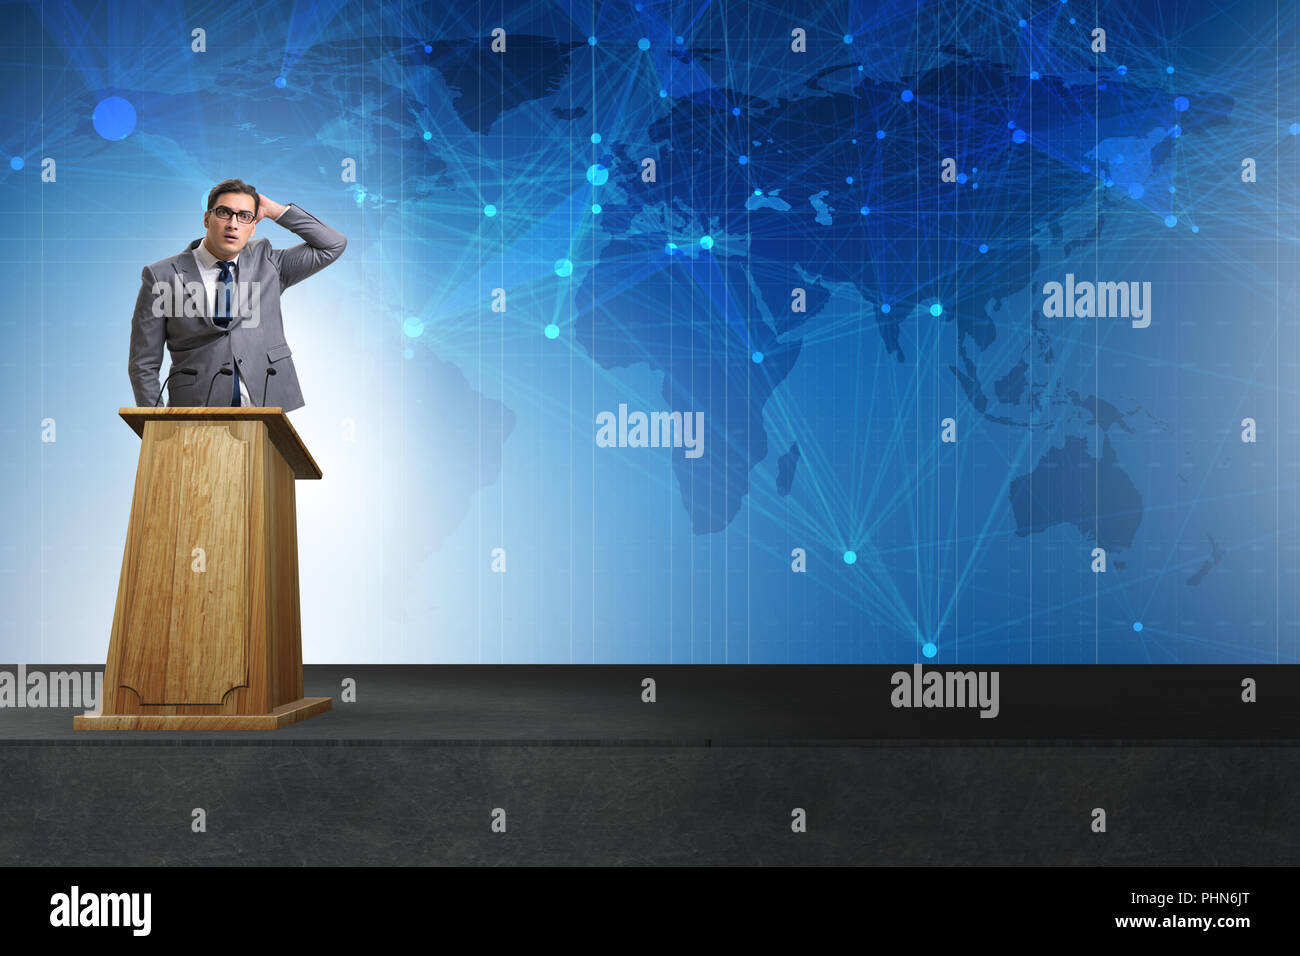 Man businessman making speech at rostrum in business concept Stock Photo